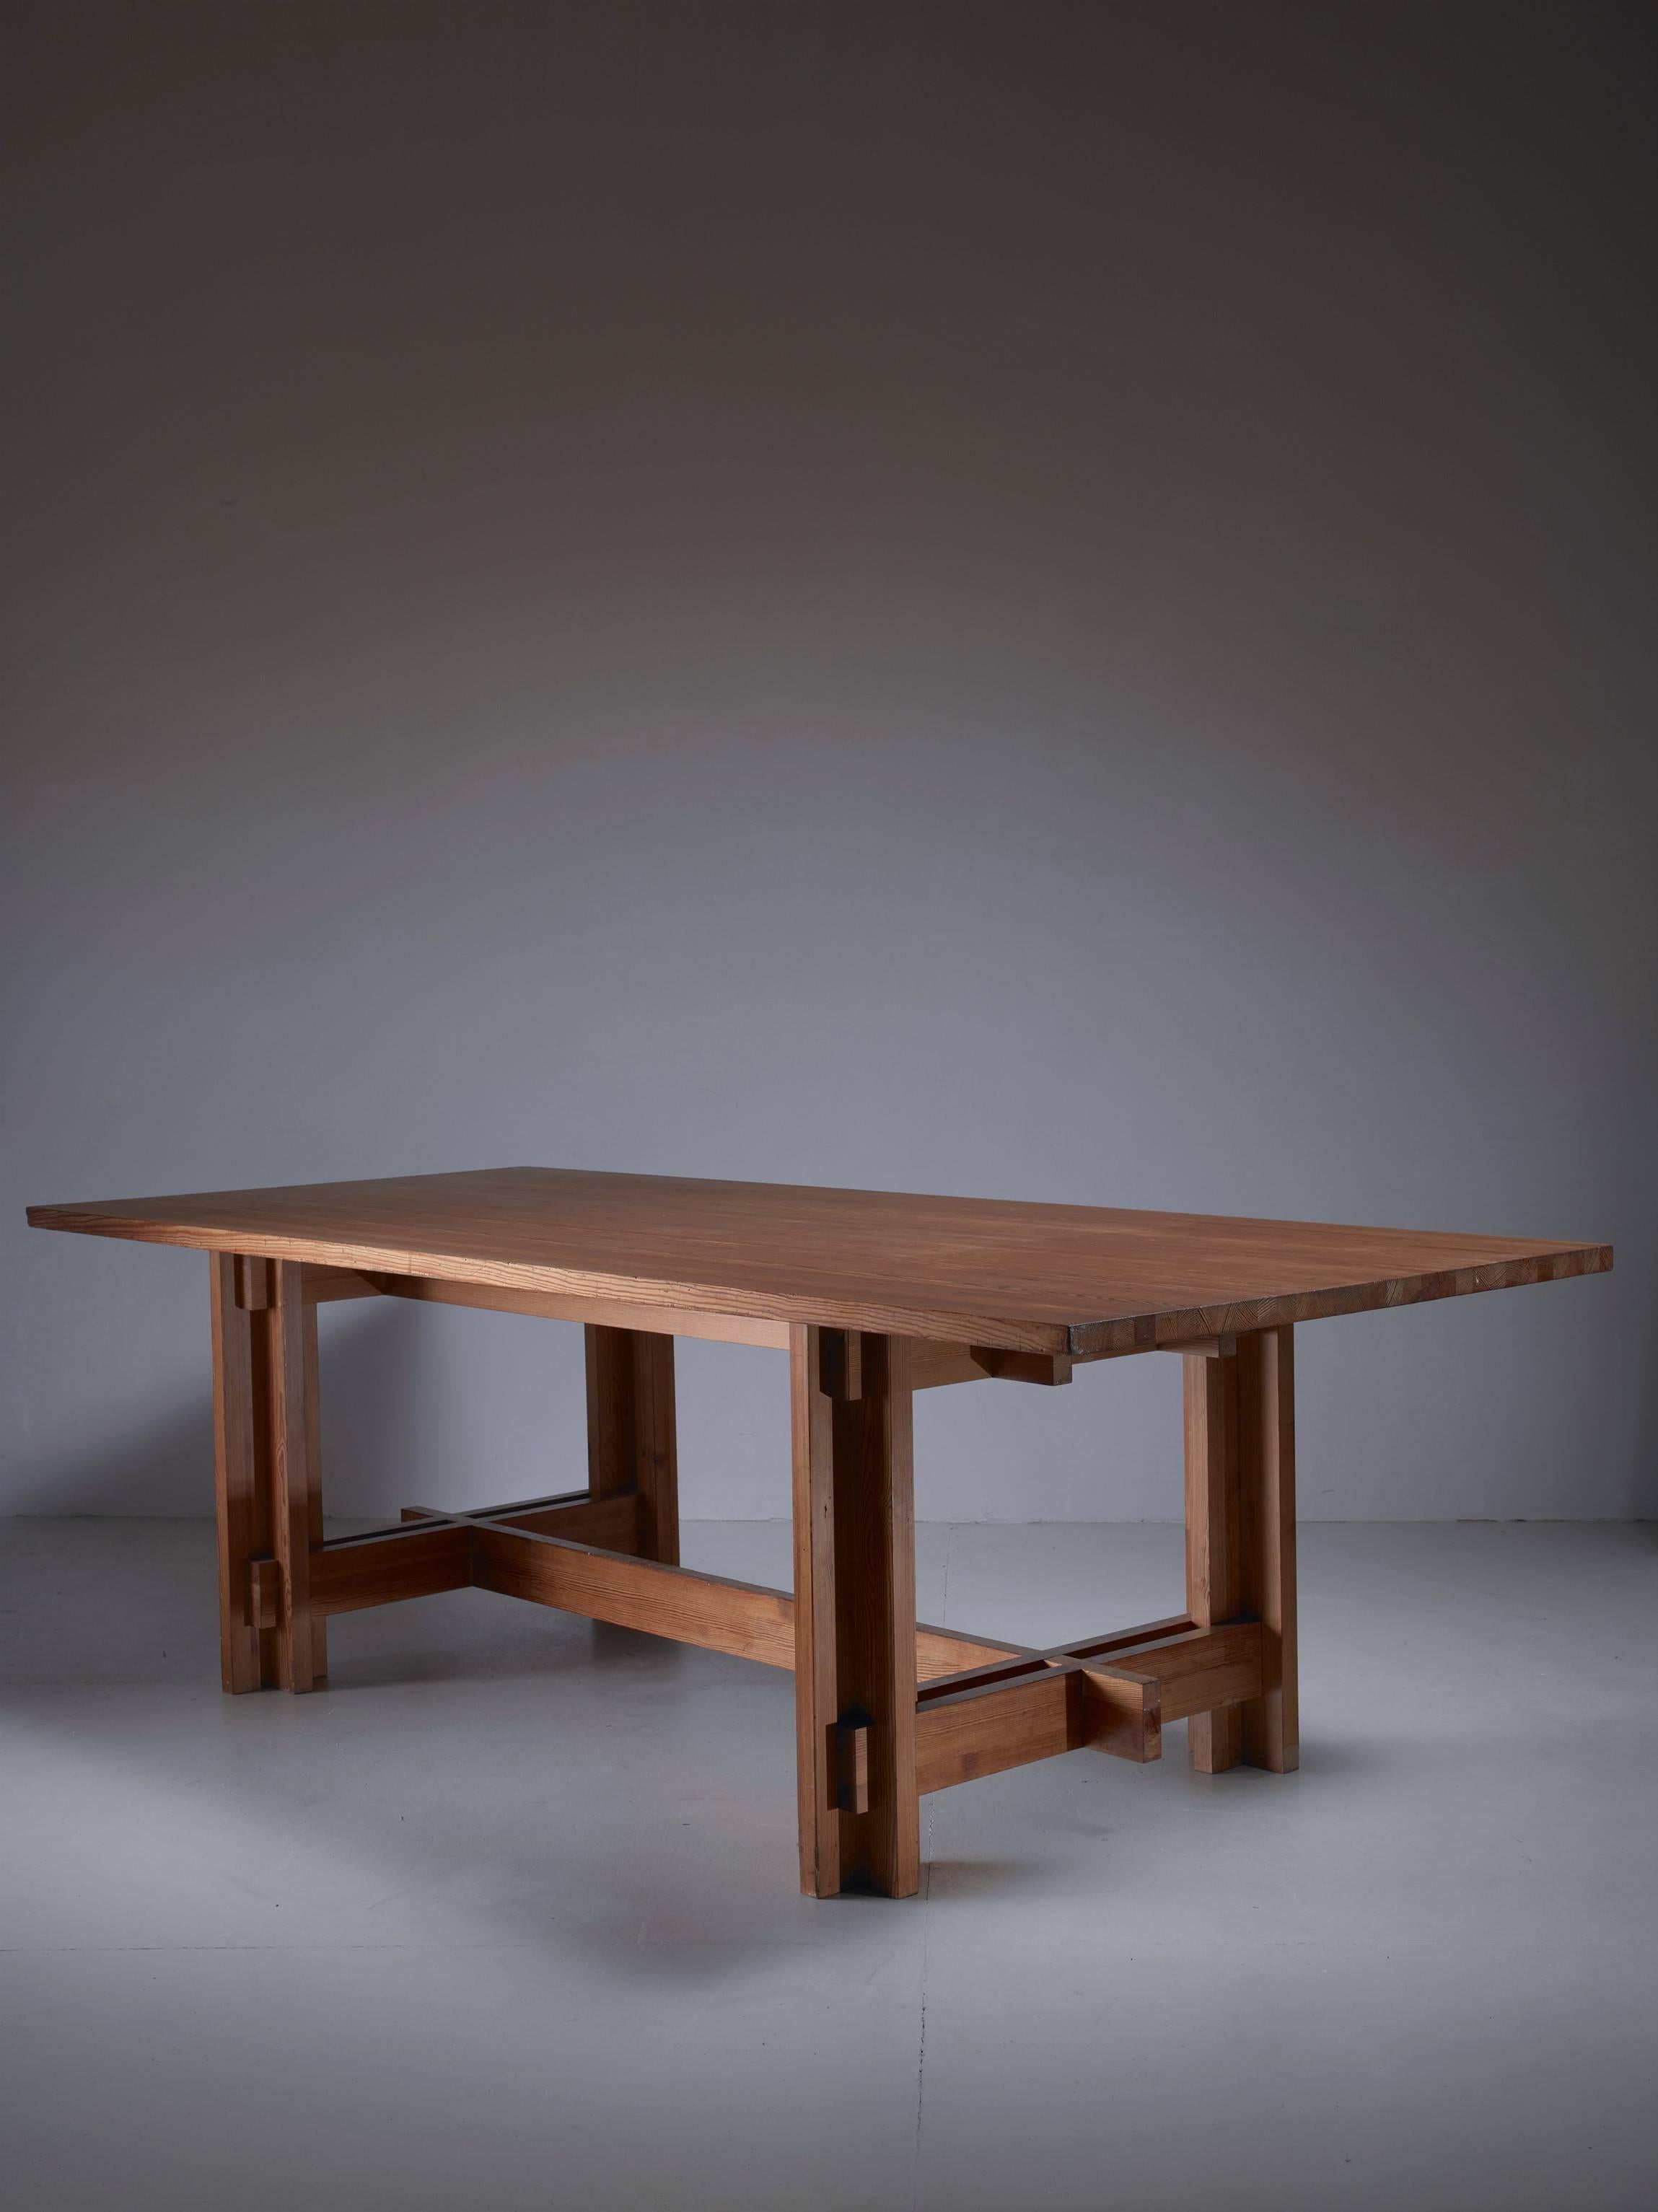 A large, architectural dining table in American pine by Austrian architect Peter Schmid. Wonderful constructional base and mildly aged tabletop.

Professor Peter Schmid (1935) is an architect and engineer who has worked in Austria, Germany and the